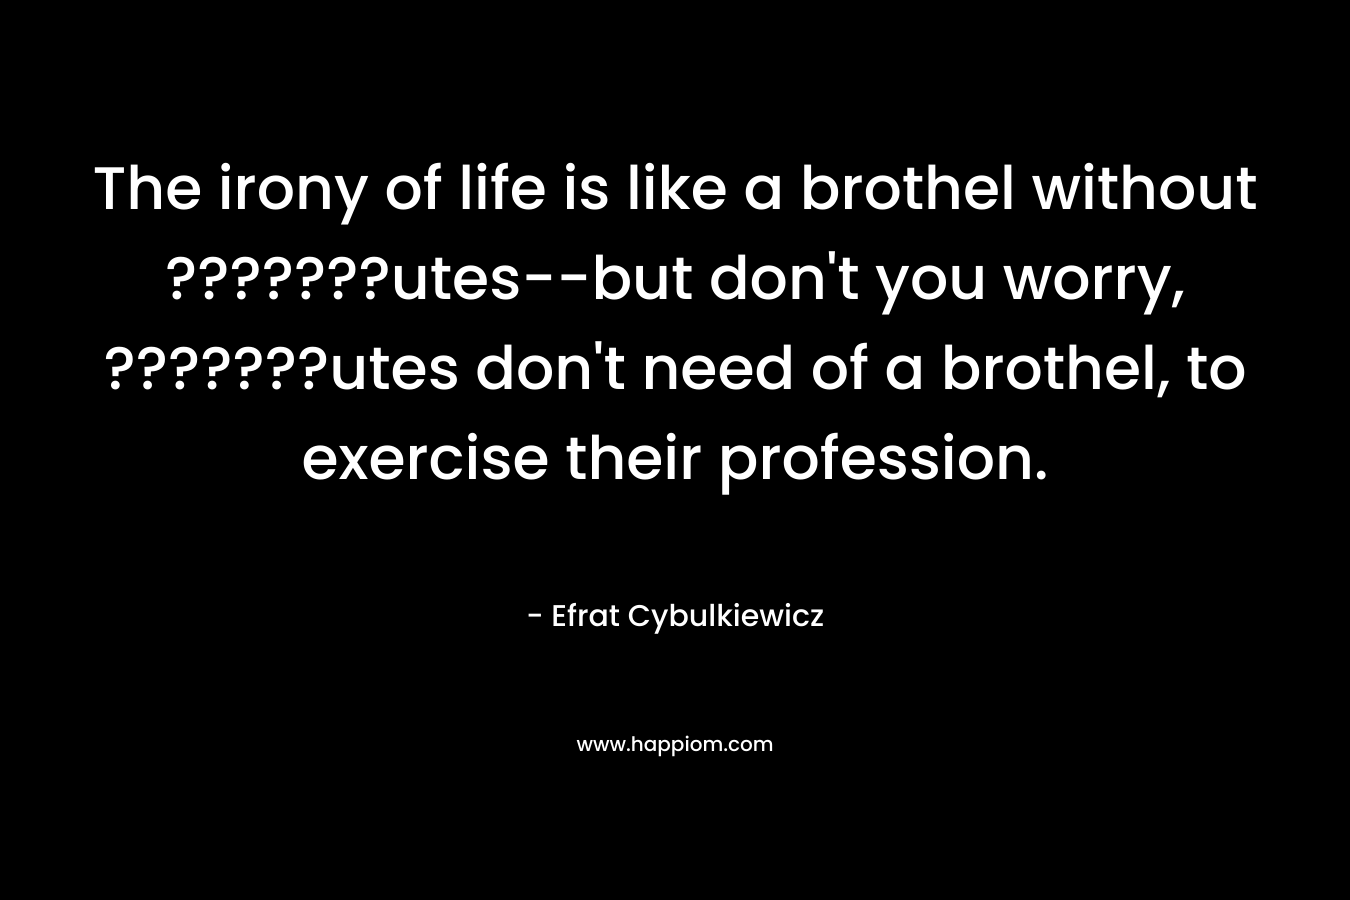 The irony of life is like a brothel without ???????utes–but don’t you worry, ???????utes don’t need of a brothel, to exercise their profession. – Efrat Cybulkiewicz